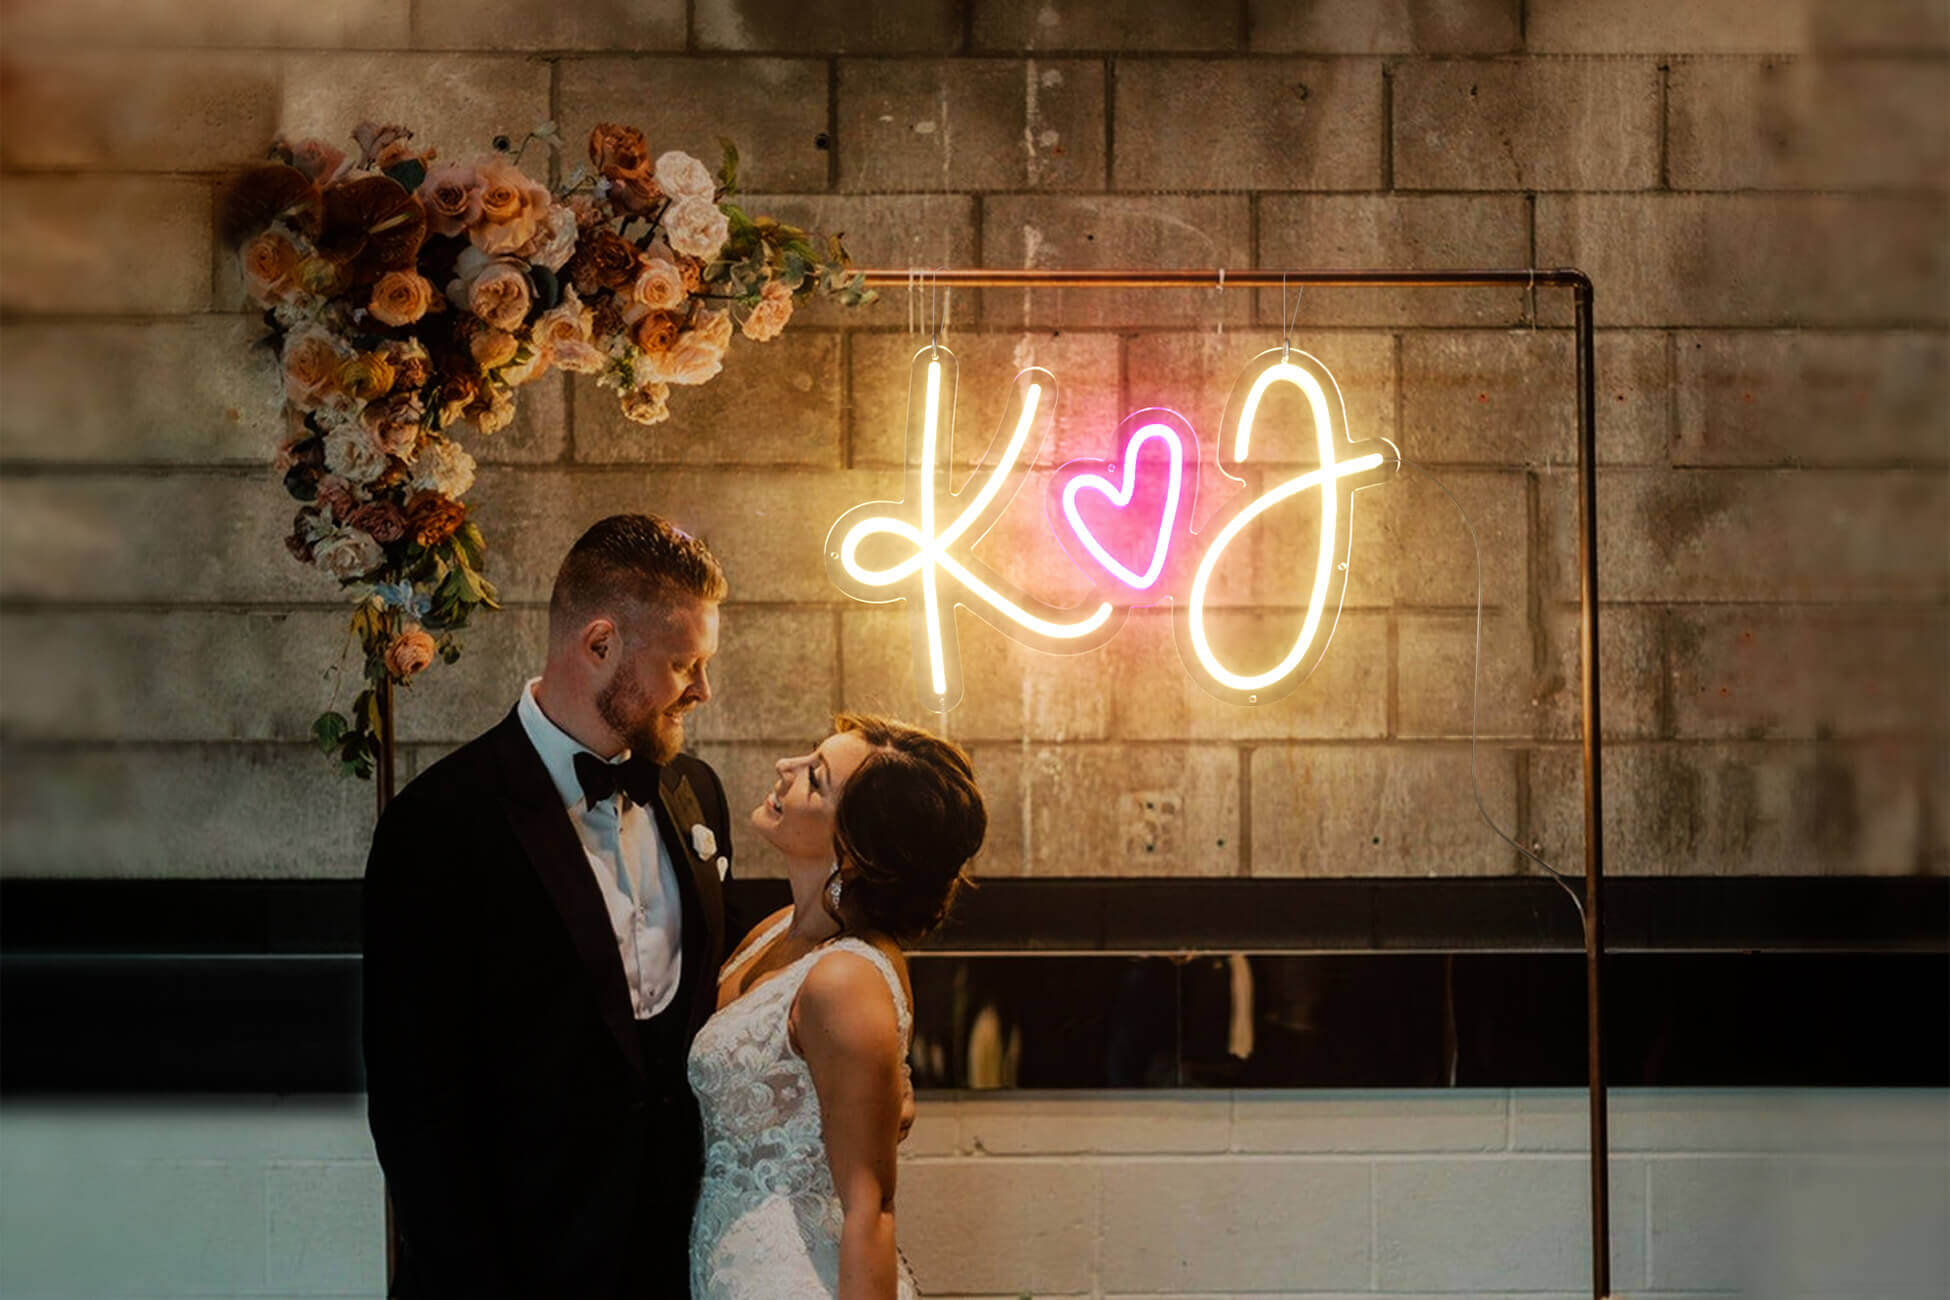 Say 'I Do' to neon wedding signs